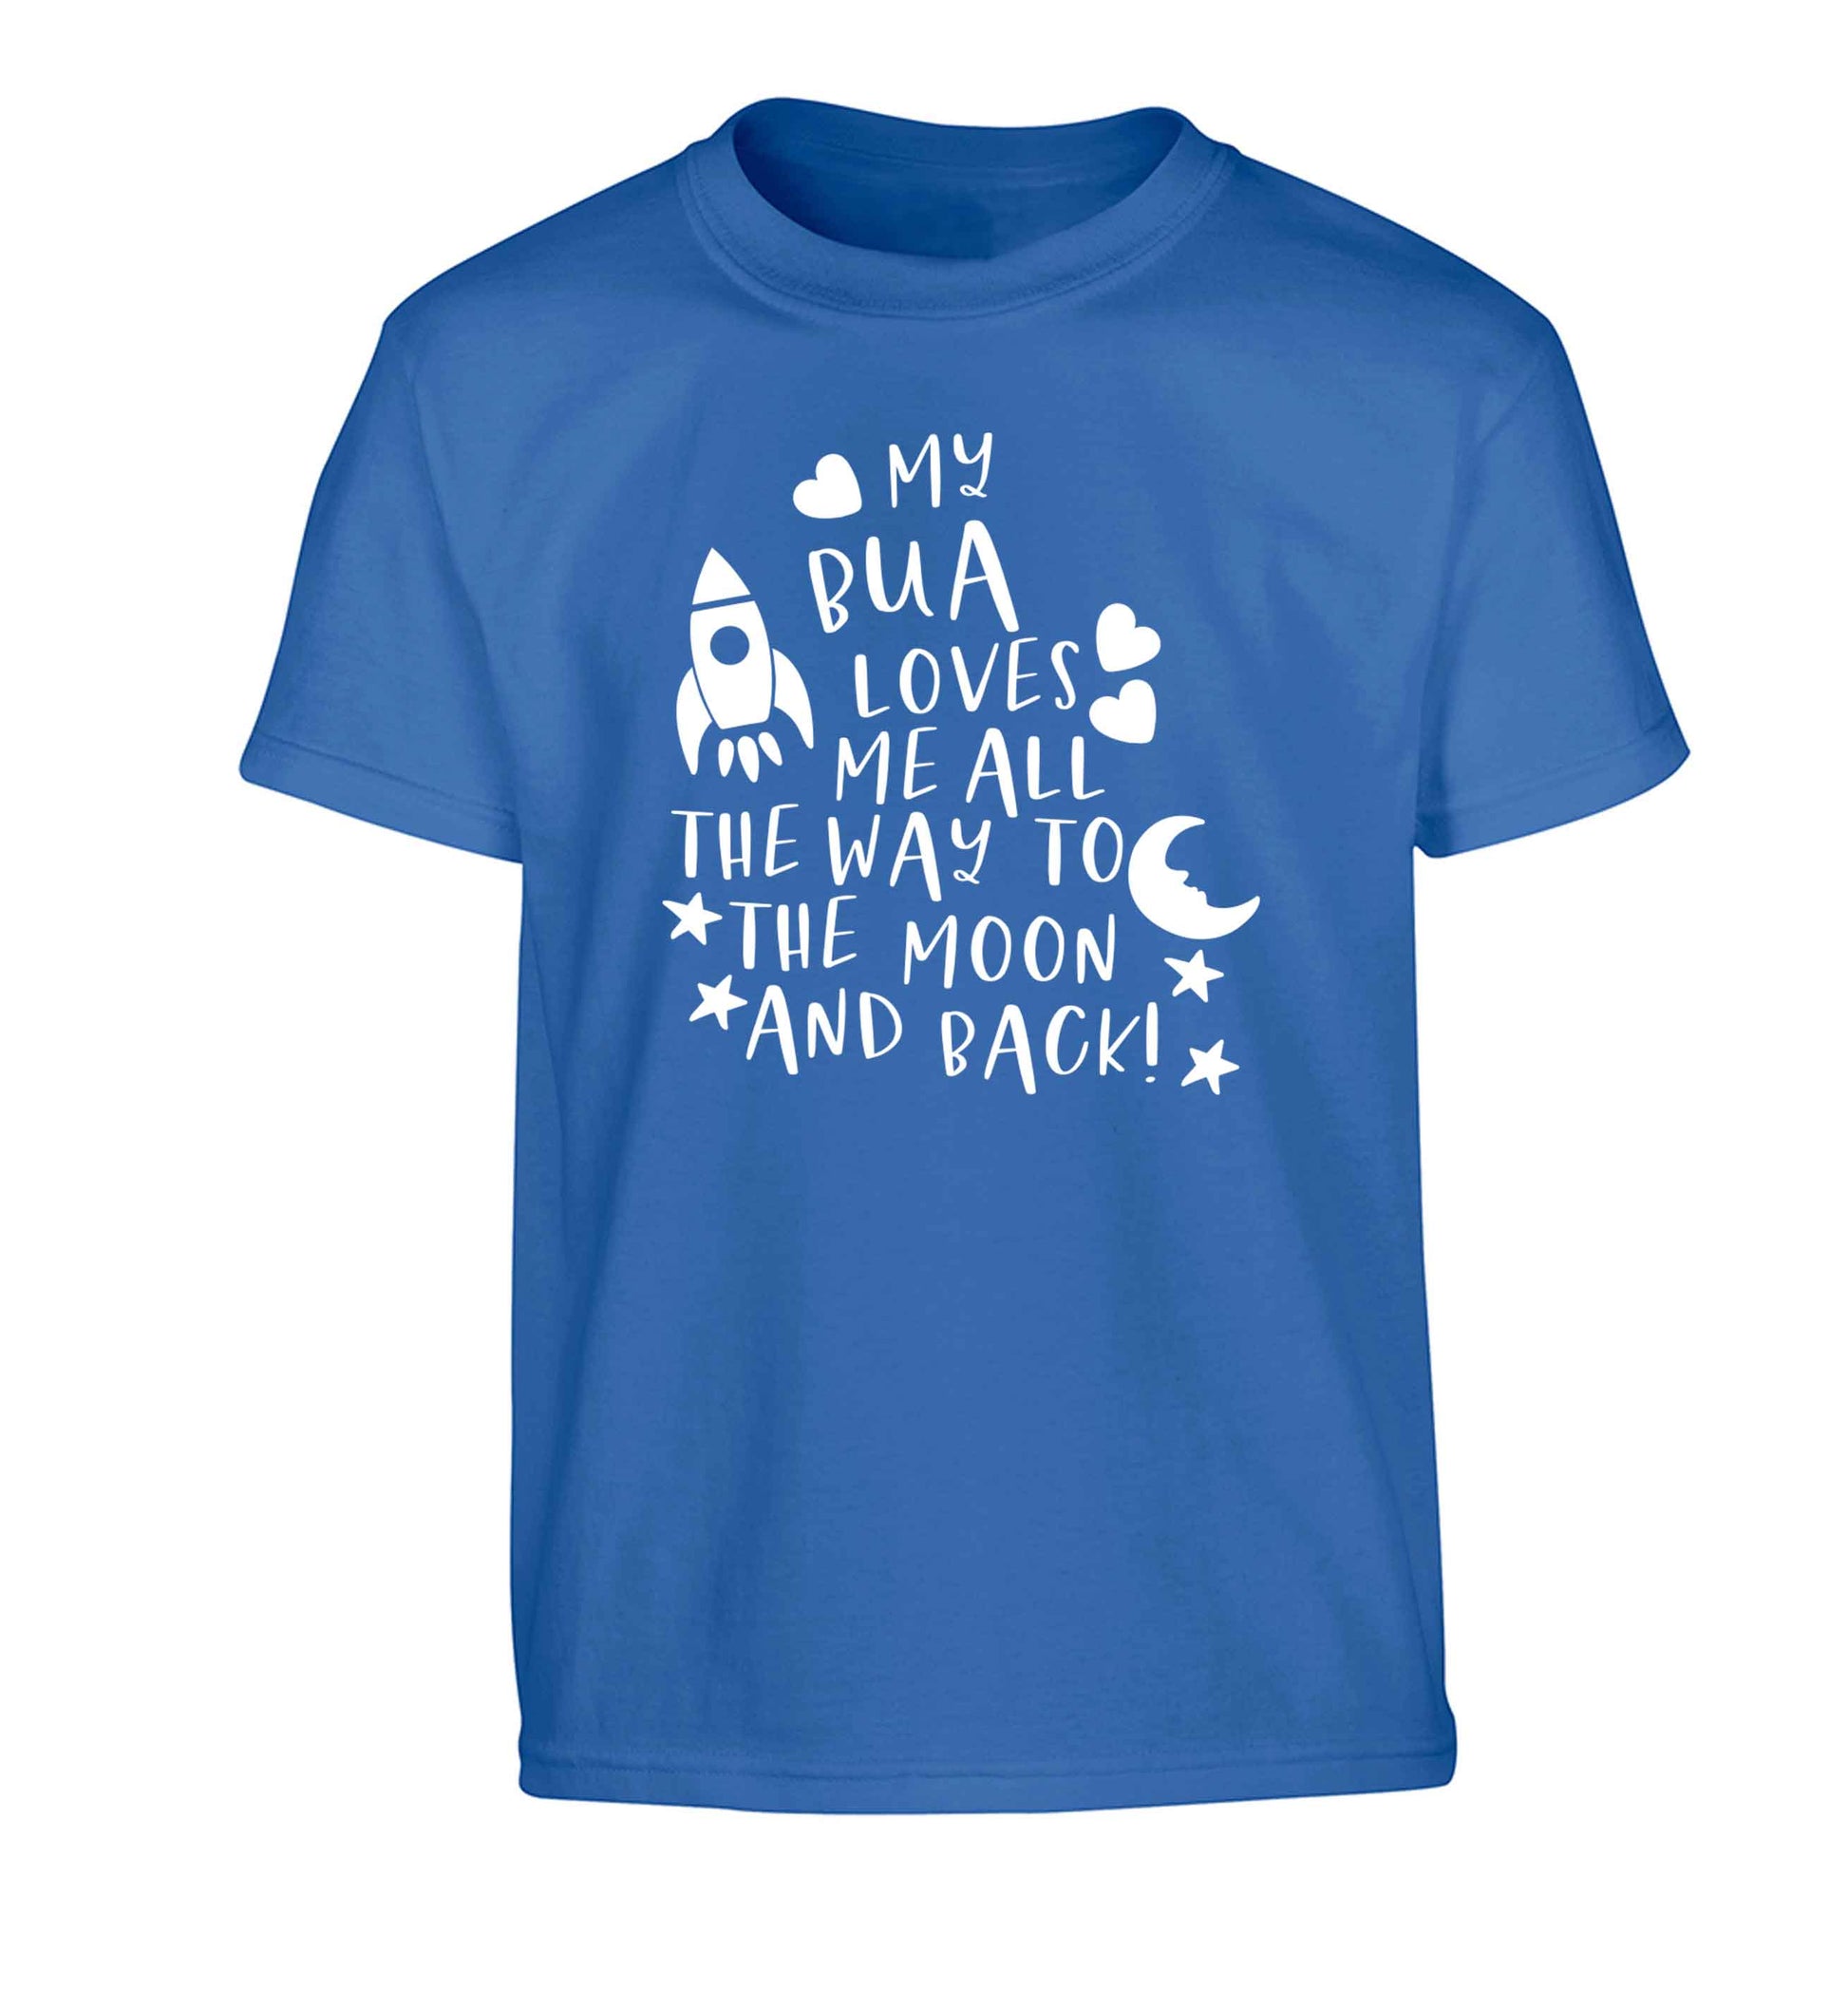 My bua loves me all they way to the moon and back Children's blue Tshirt 12-13 Years